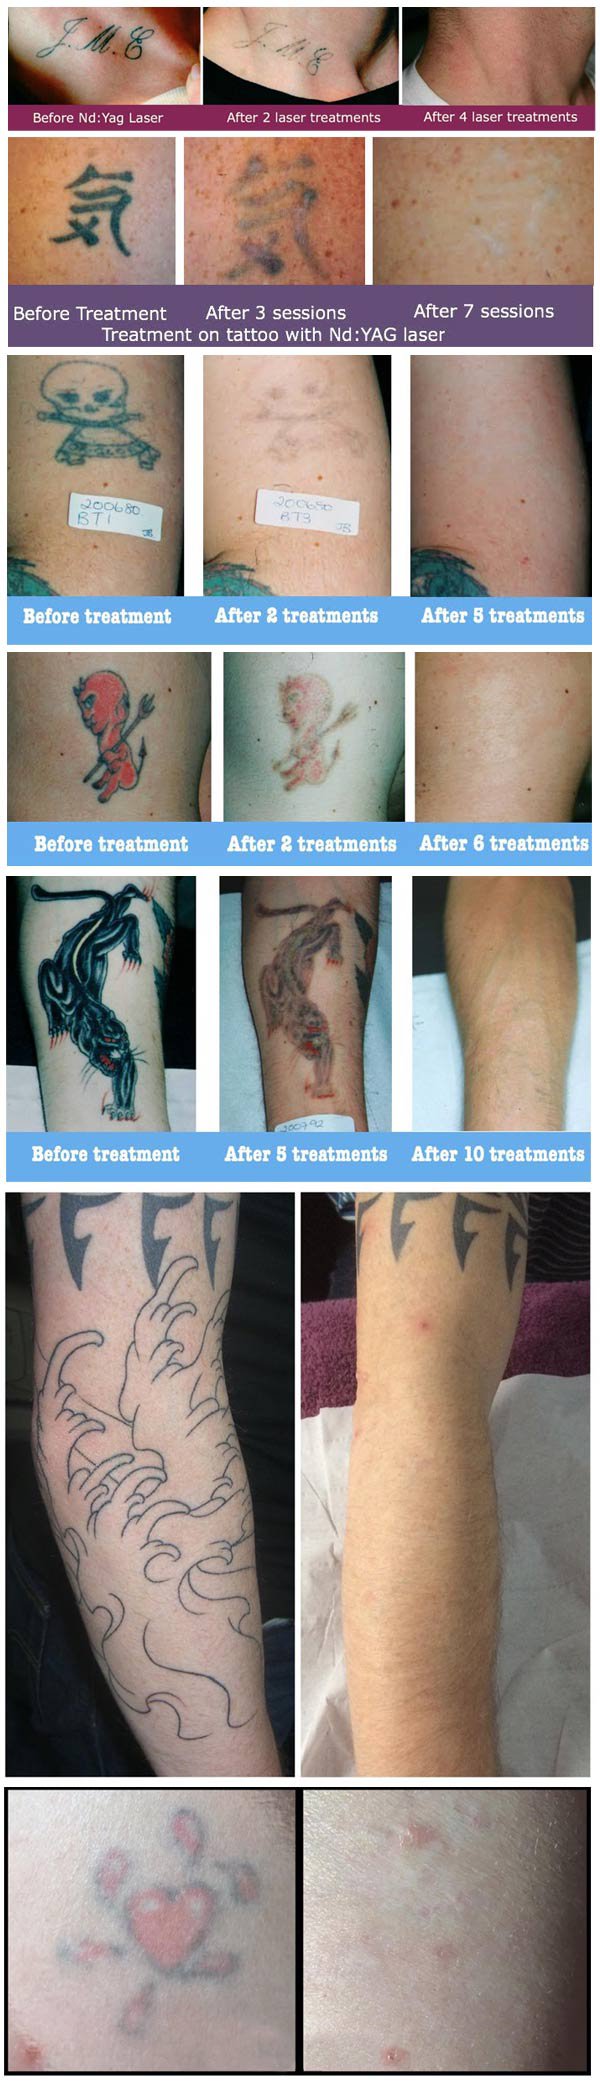 laser_tattoo_removal_before_after.jpg